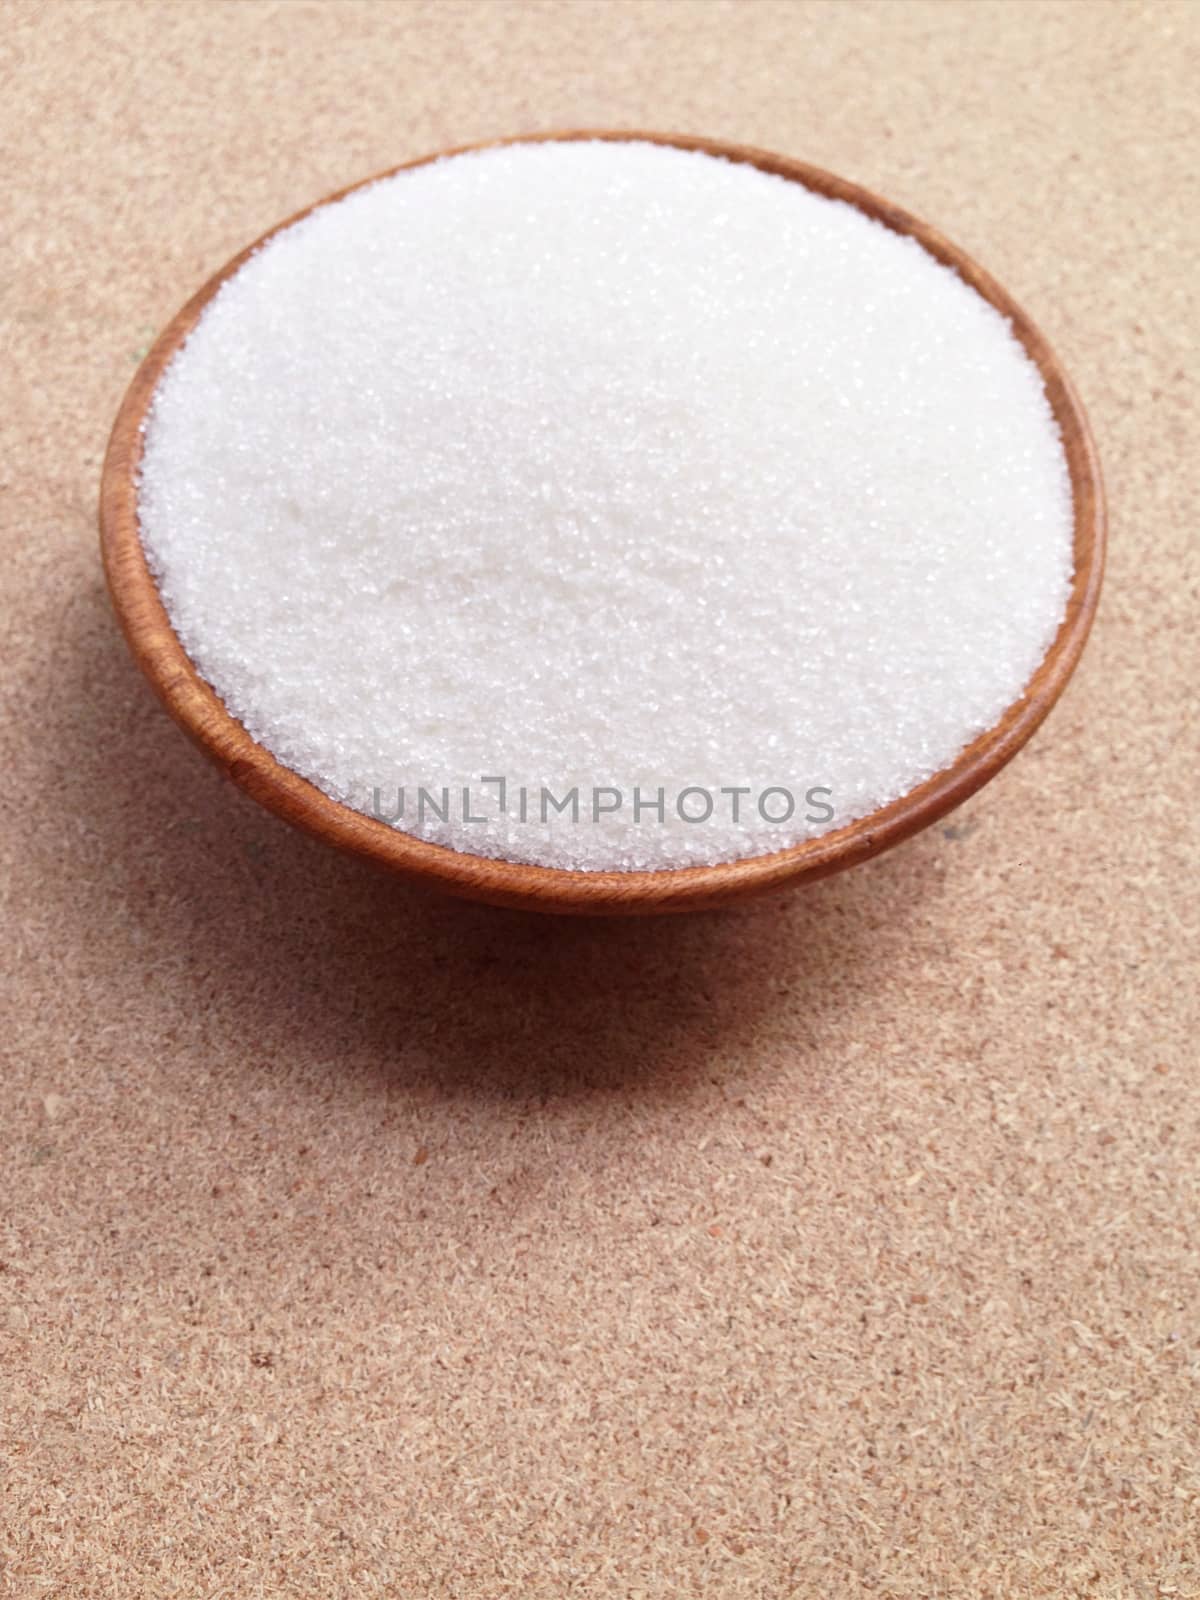 Bowl of sugar on plywood background by Bowonpat